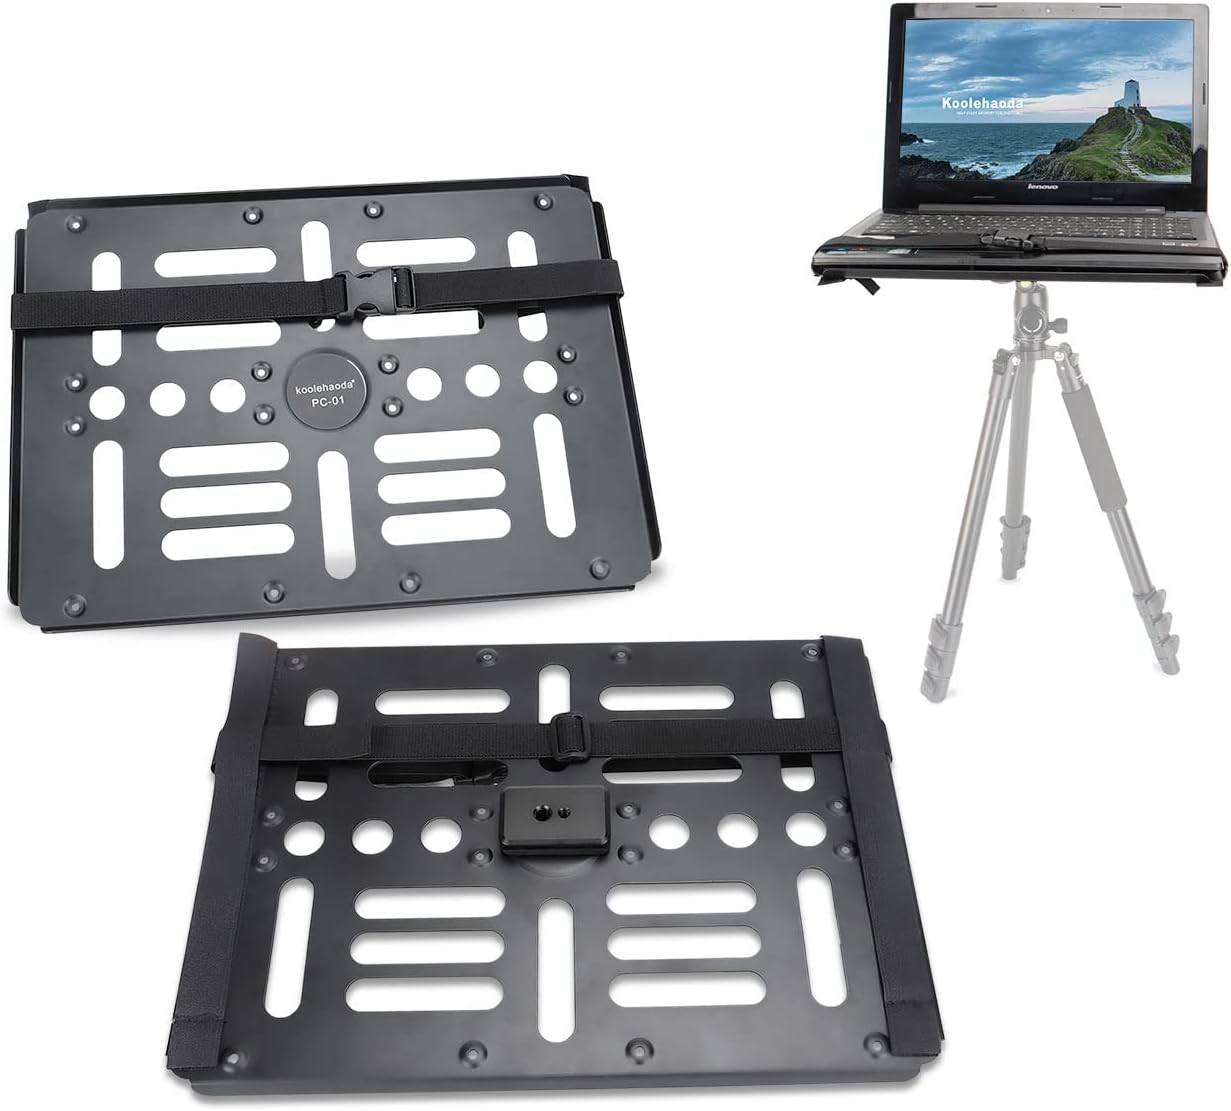 koolehaoda Laptop Notebook Pallet Projector Tray Holder with Arca-Swiss Interface for 1/4" to 3/8" Screw Tripod Stand Ballhead Mount, 22 lbs Capacity with Vented Cooling Platform Stand